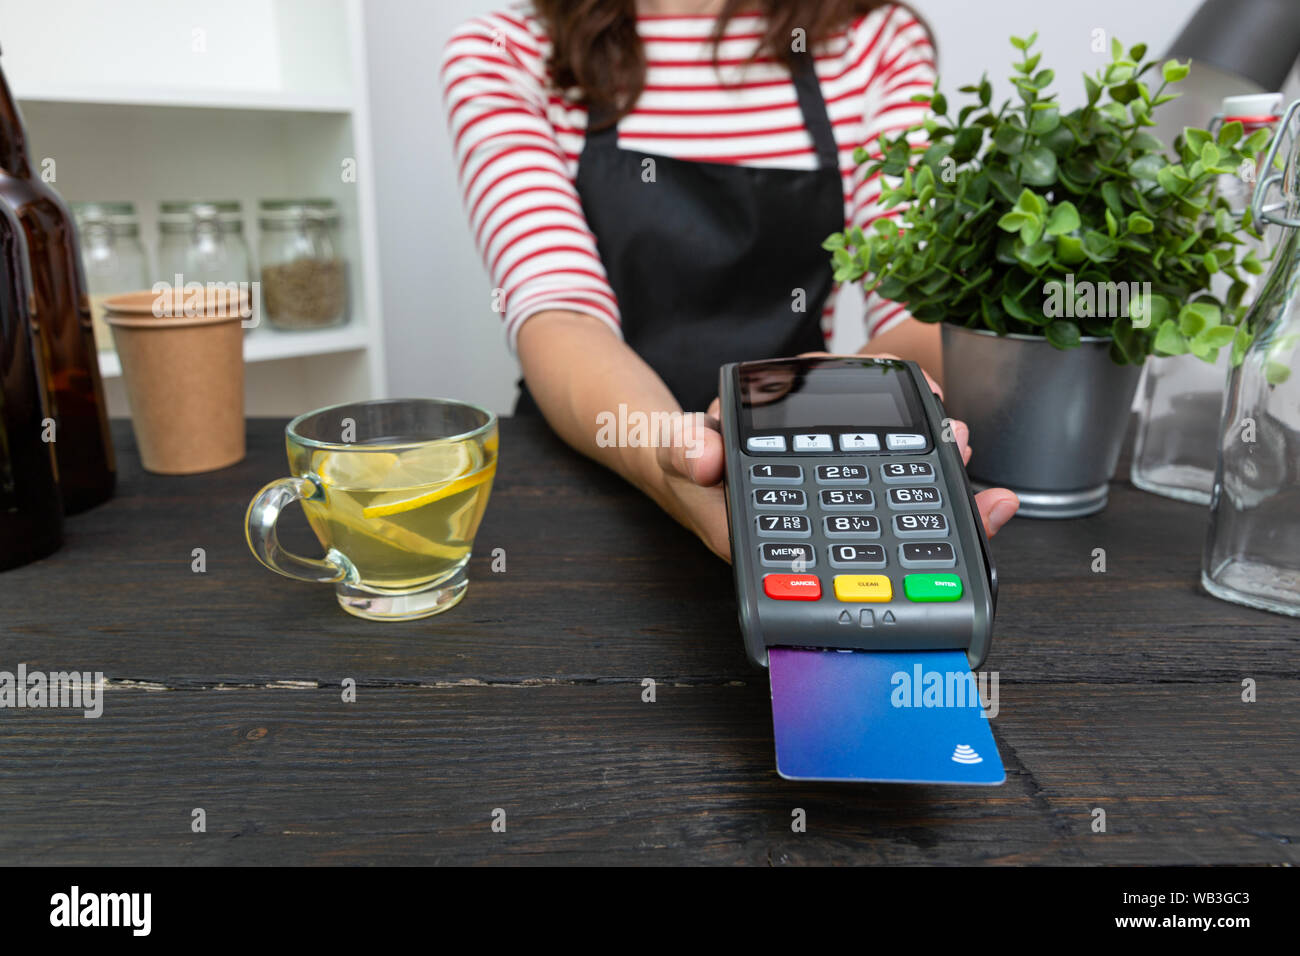 Customer making wireless or contactless payment using credit card Stock Photo